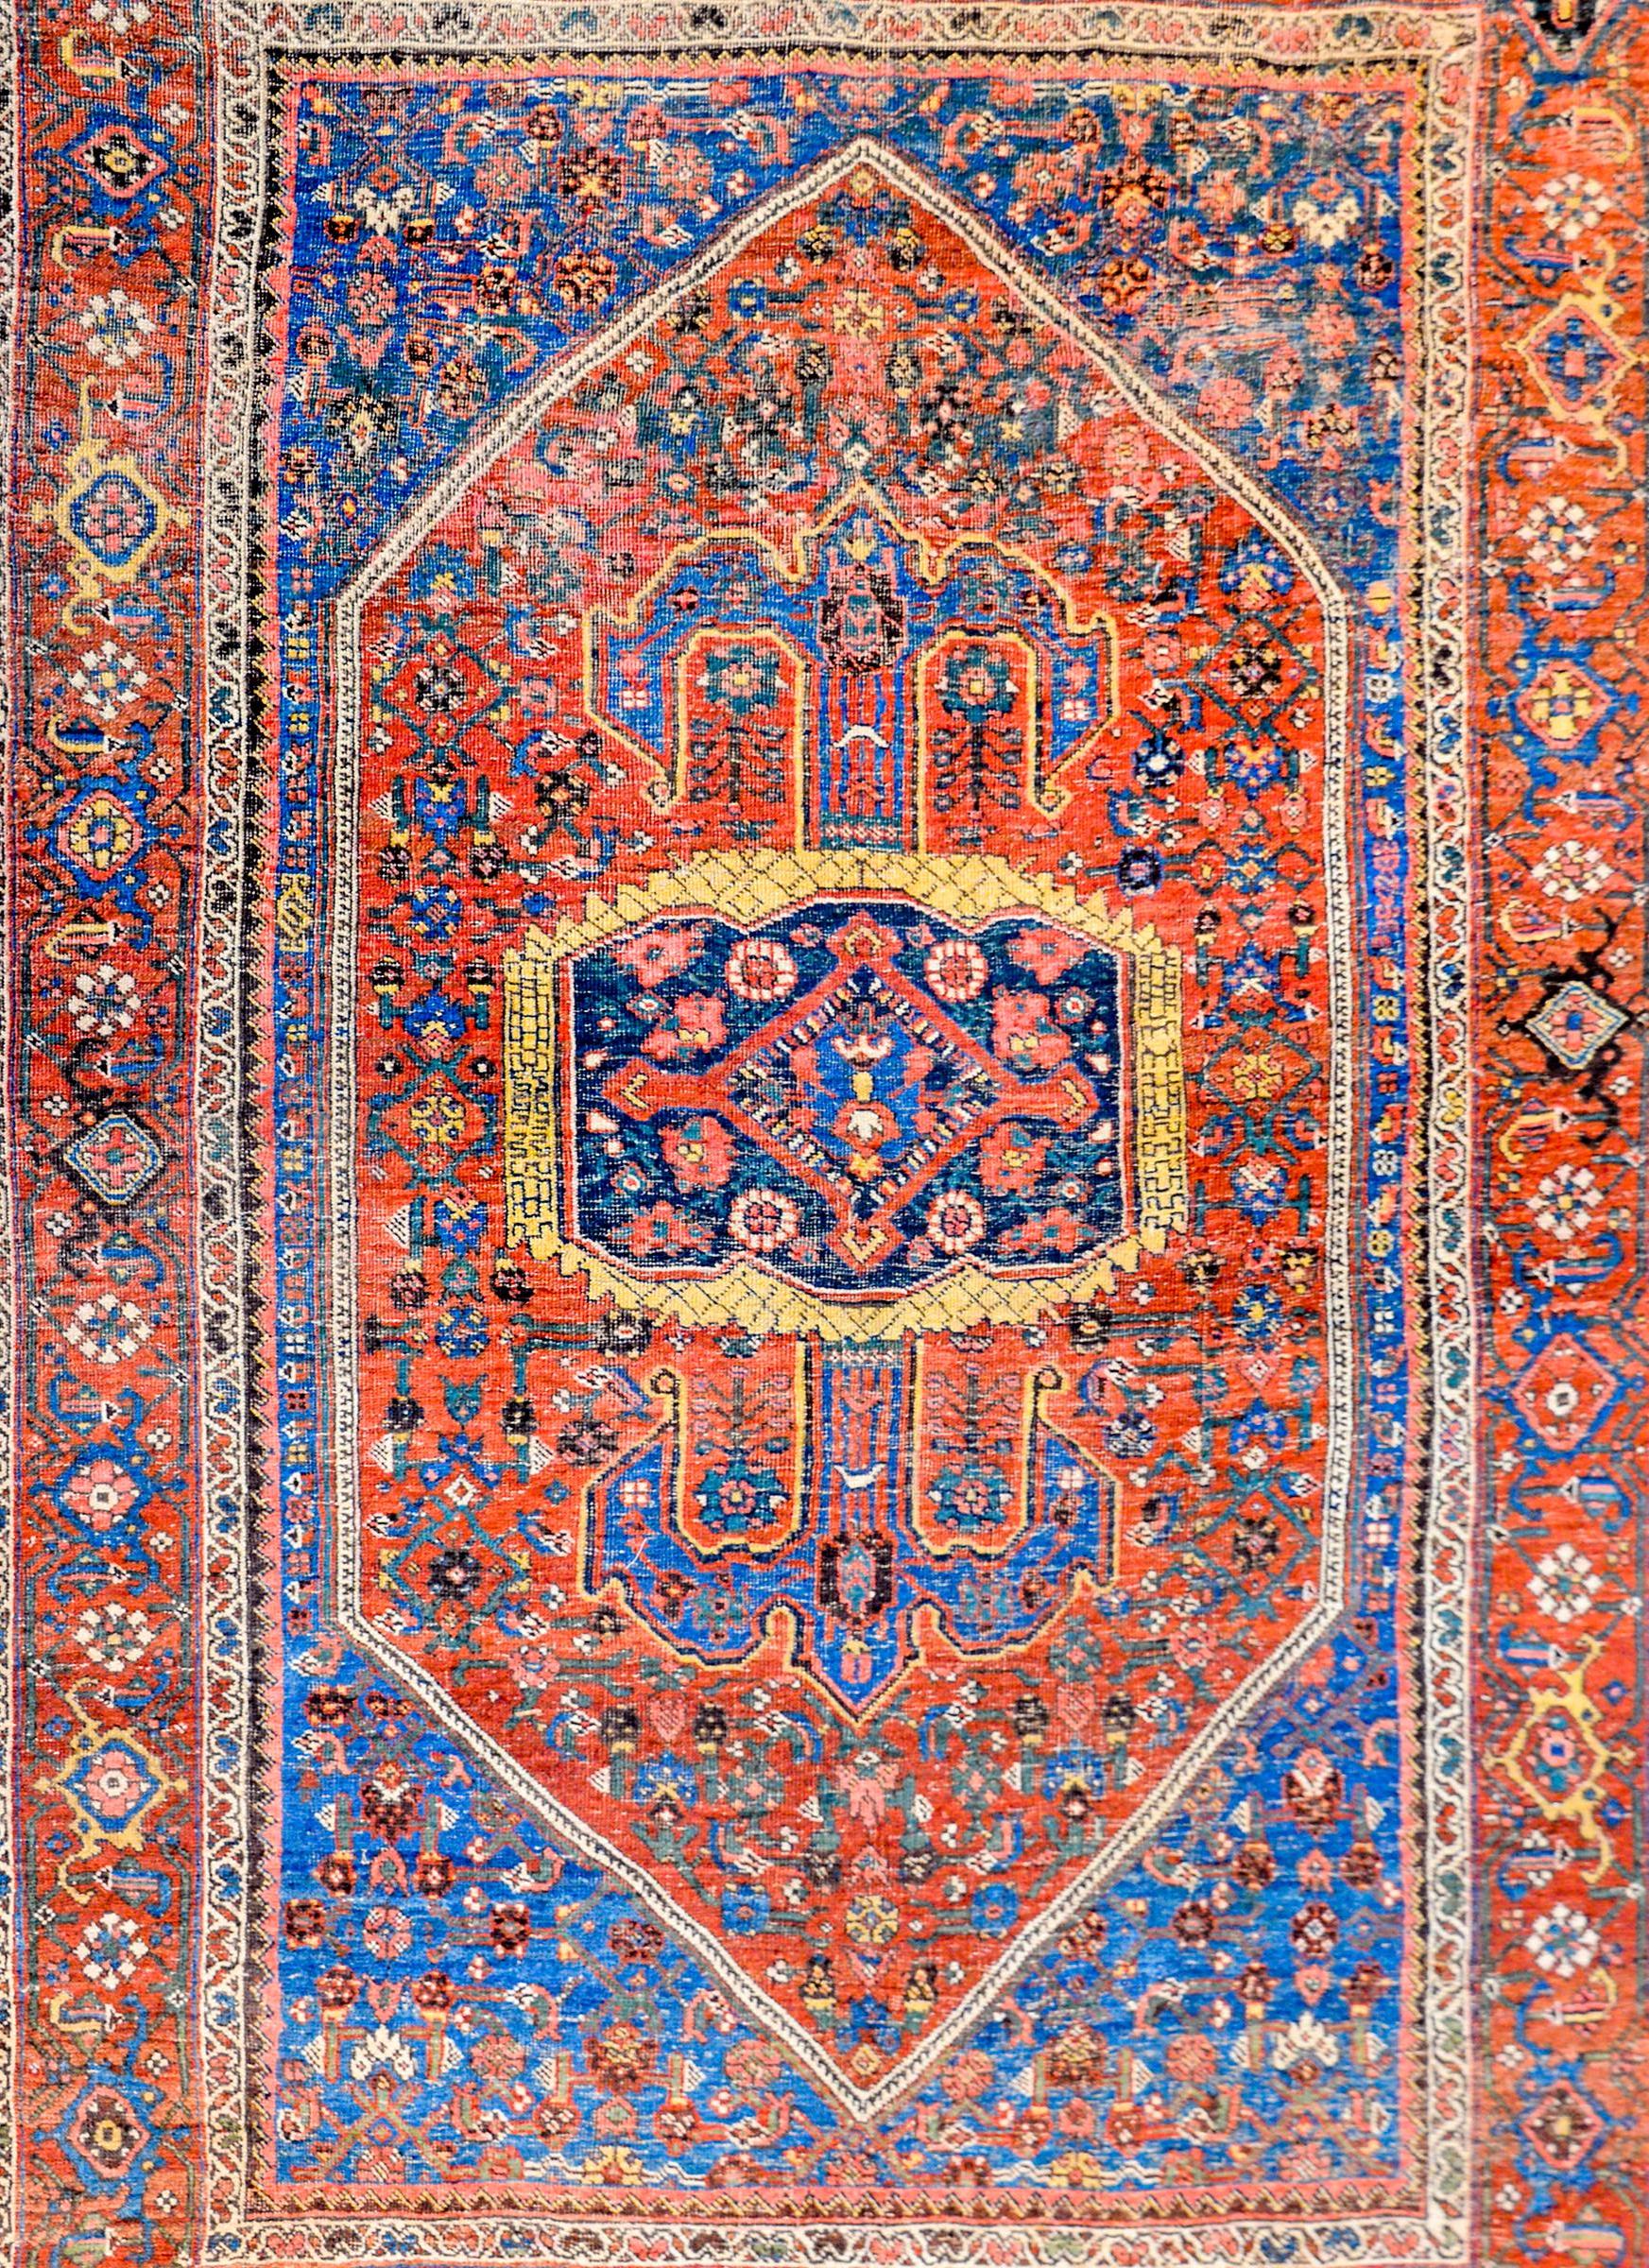 An extraordinary early 20th century Persian Bidjar with an intensely woven field of myriad flowers and scrolling vines woven in indigo, green, gold, white, and salmon colored vegetable dyed wool, on a bold crimson background. The border is equally